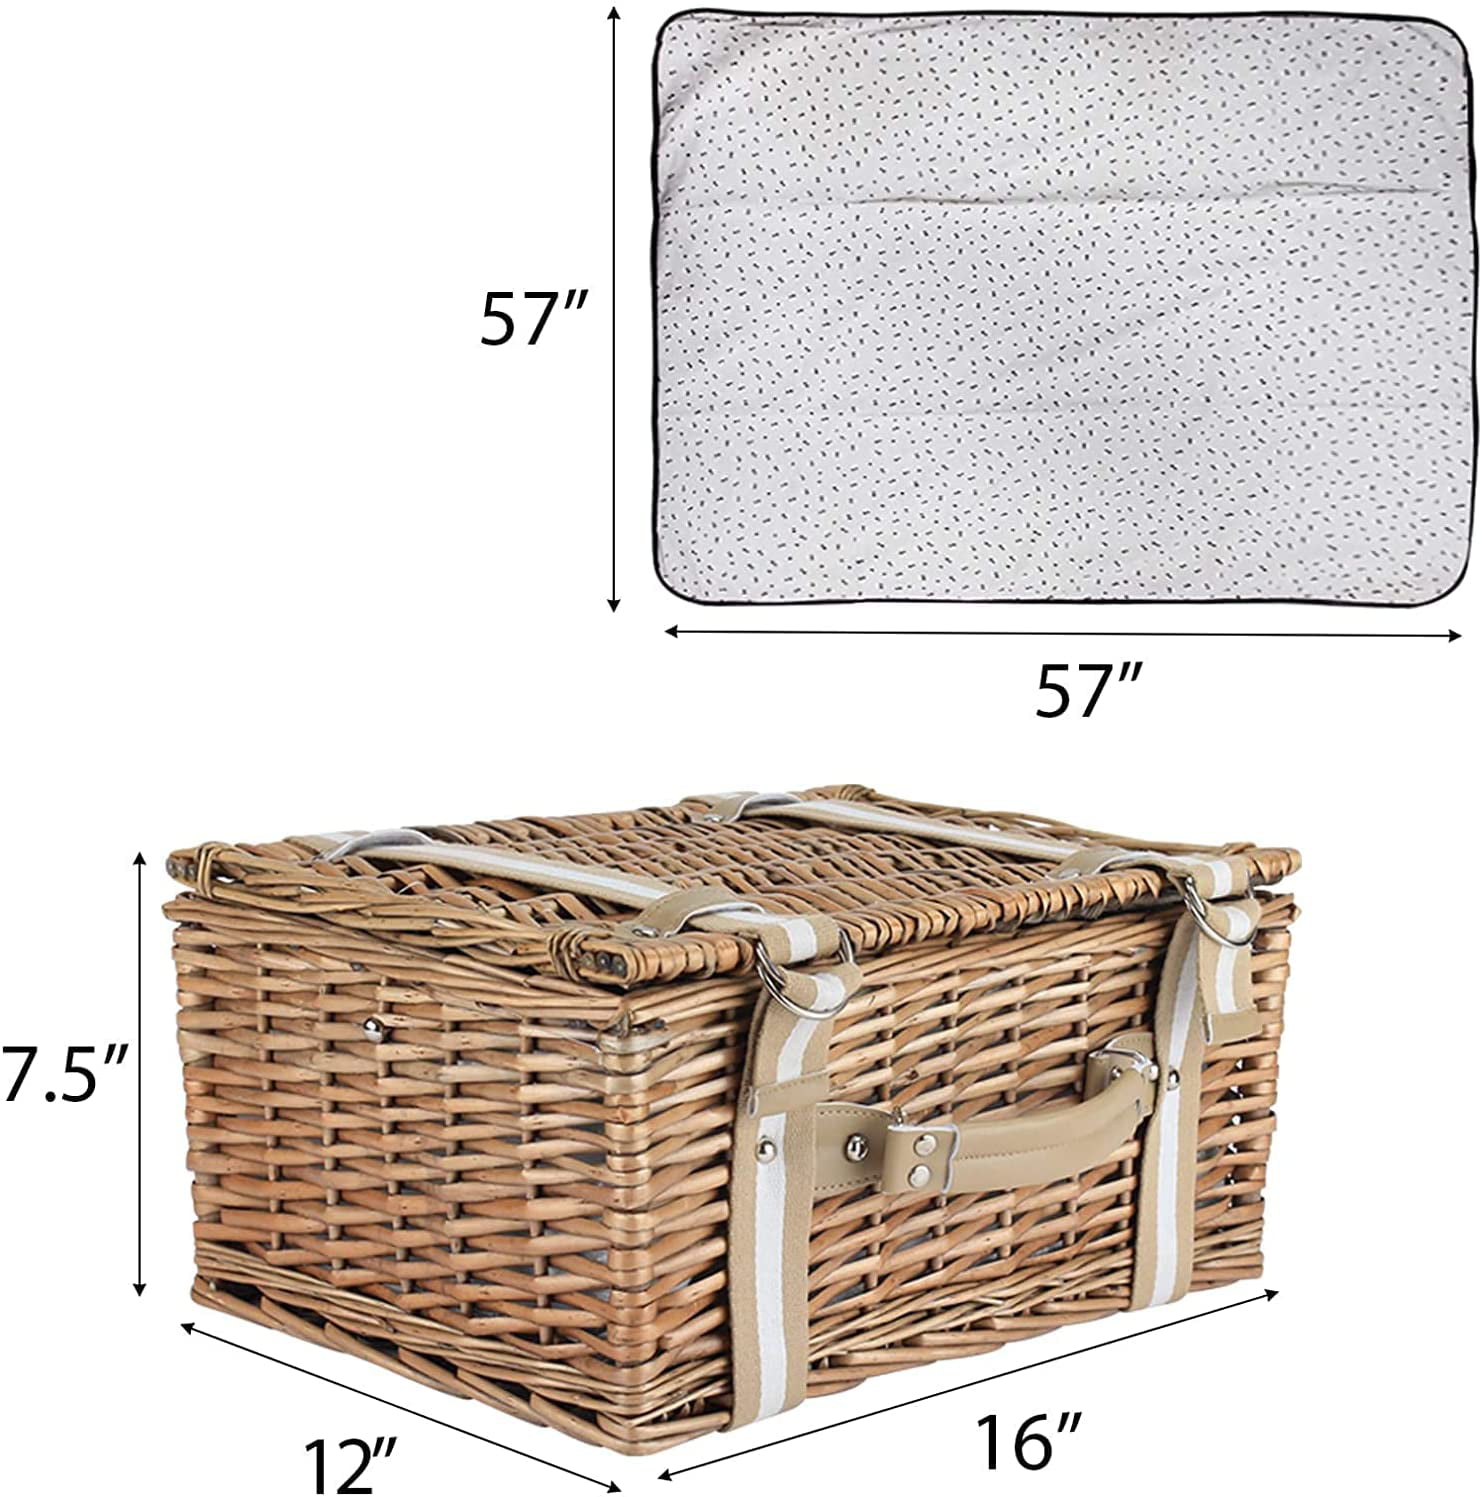 Large 2 Person Insulated Picnic Basket Wicker Basket Camping Outdoor Willow 